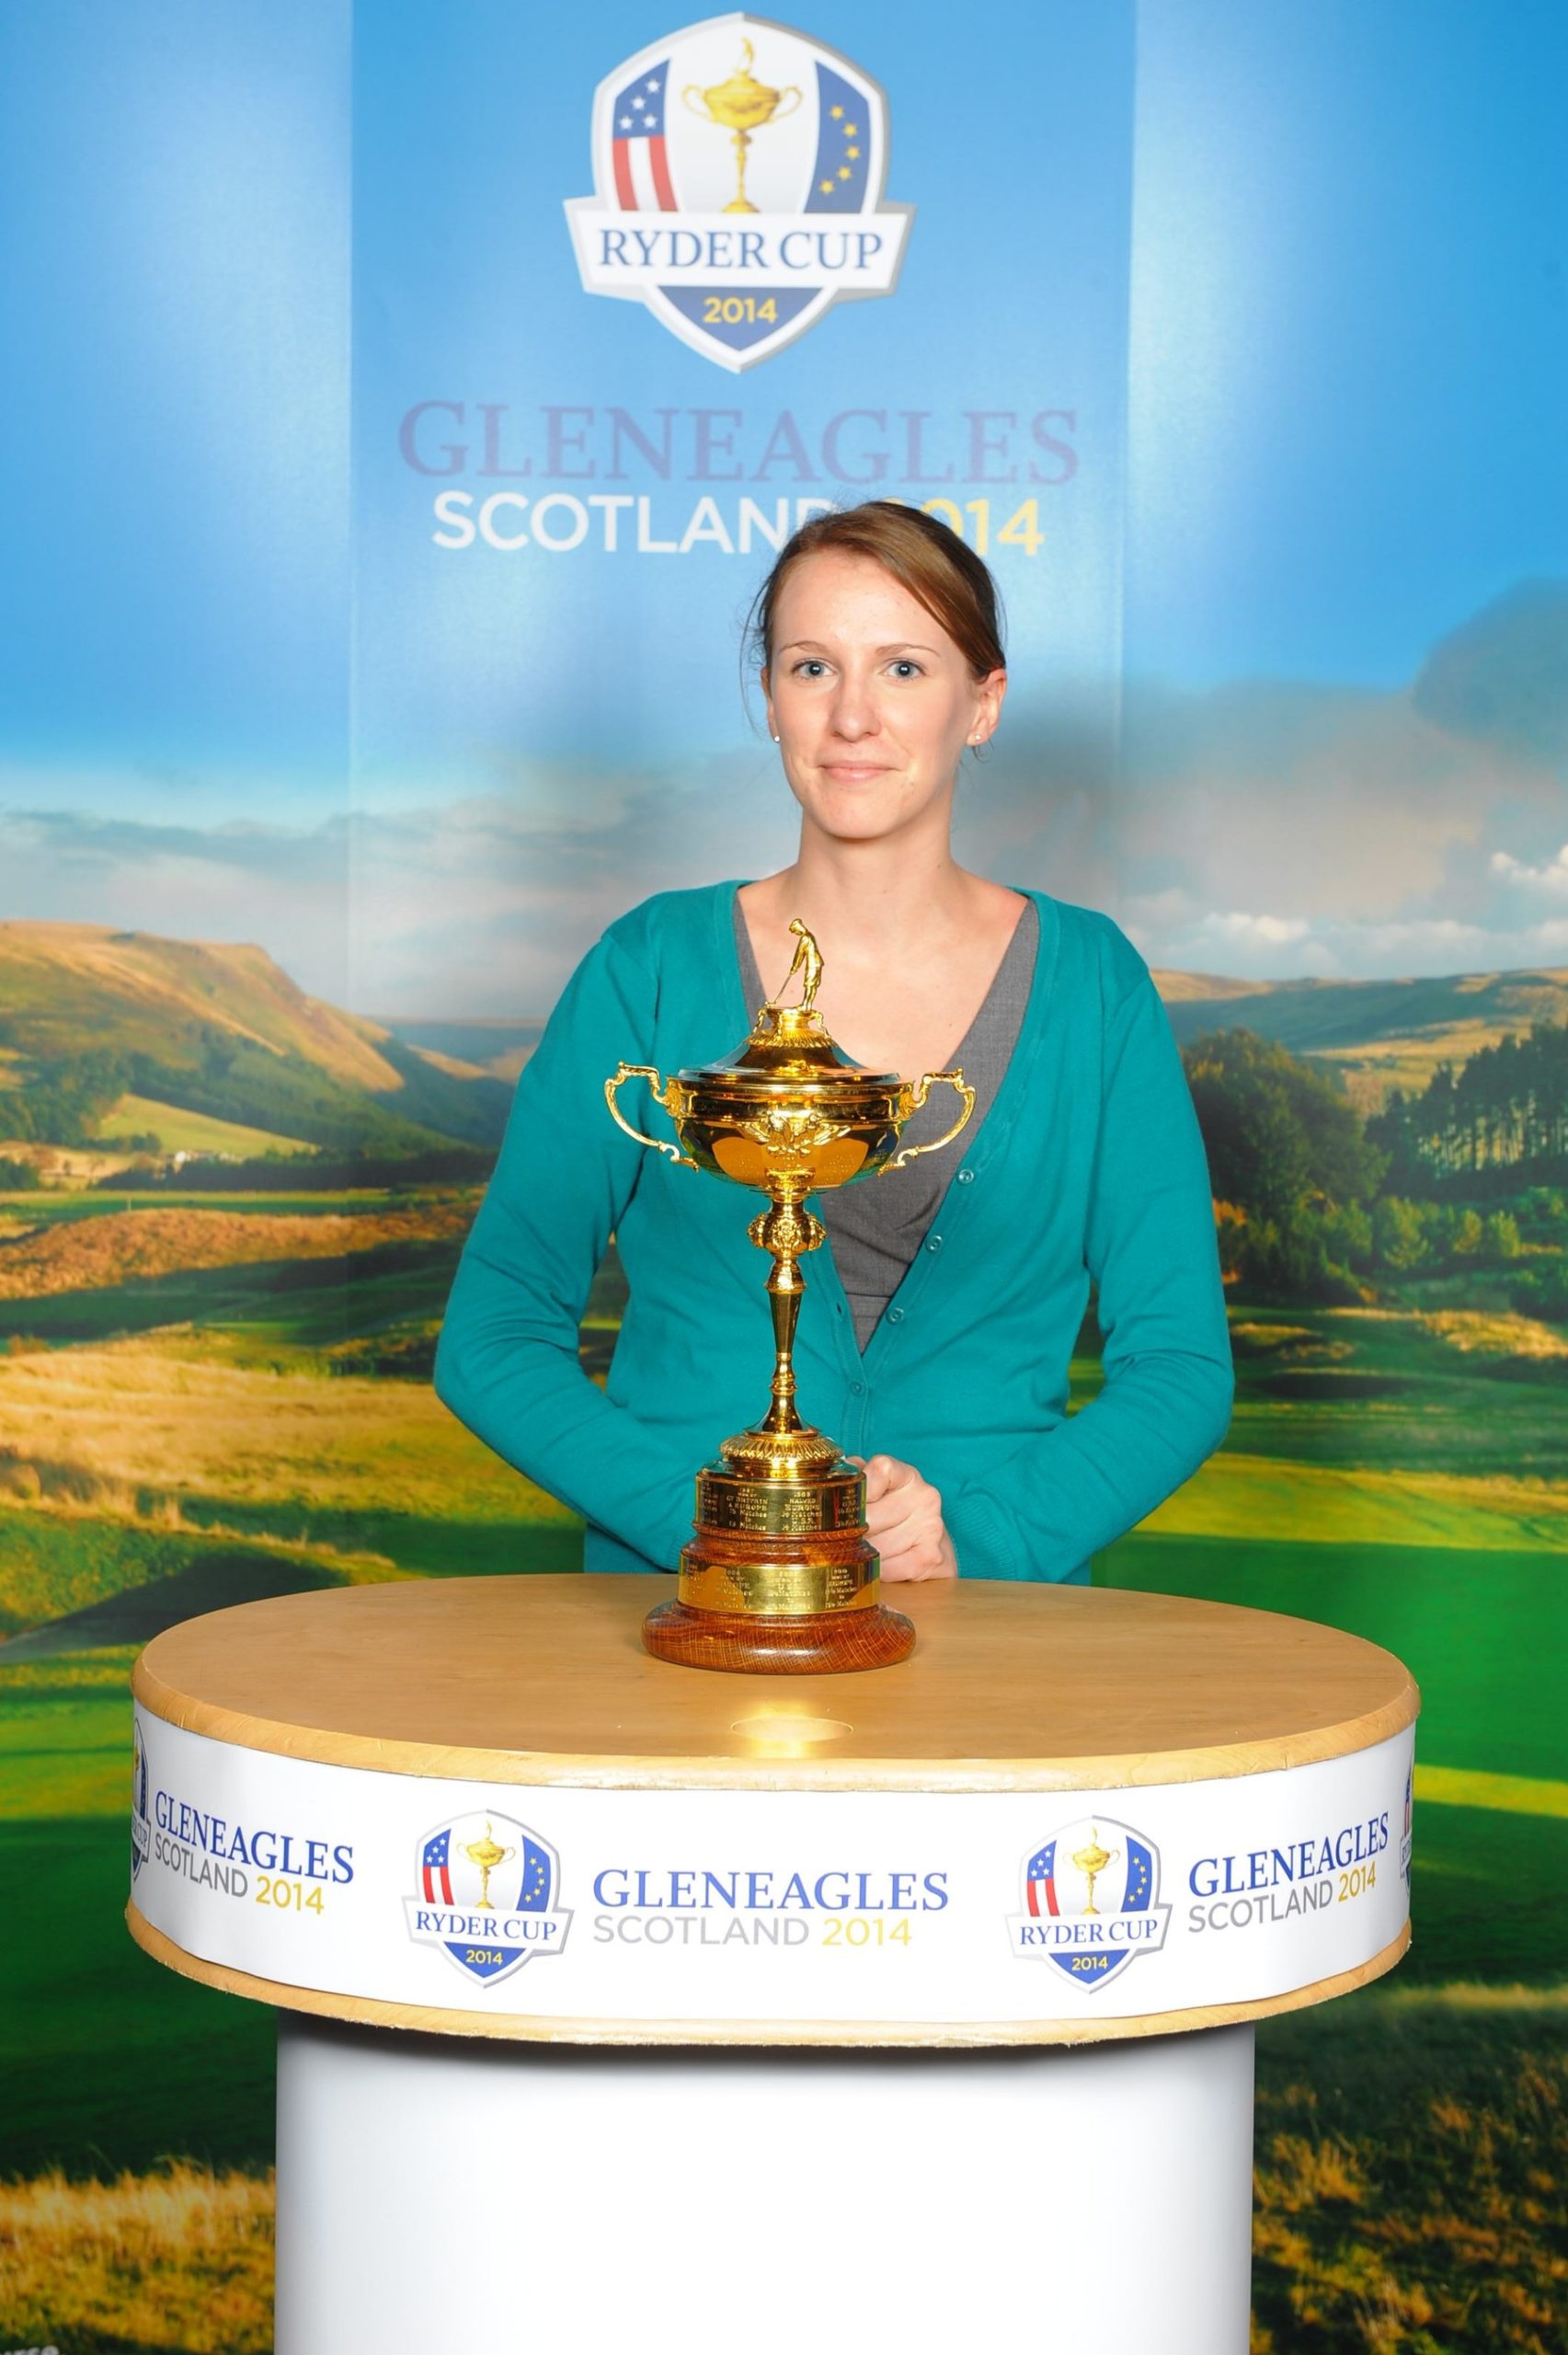 Kim Carsok at Scottish Golf Show SGS ryder cup